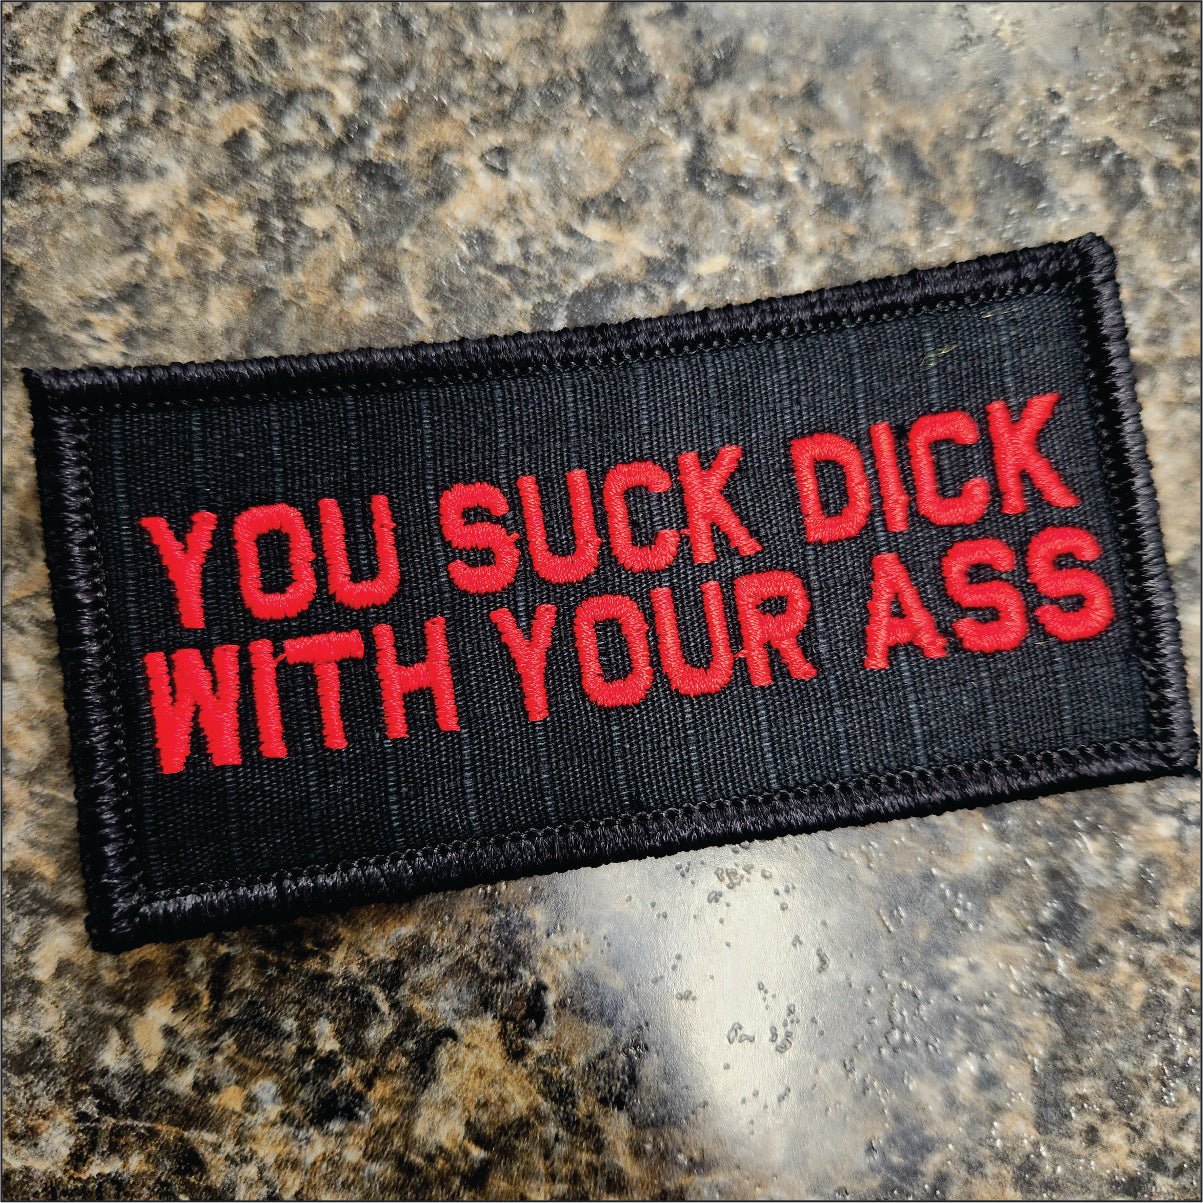 As Seen on Socials - You Suck Dick With Your Ass - 2x4 Patch - Black w/Red